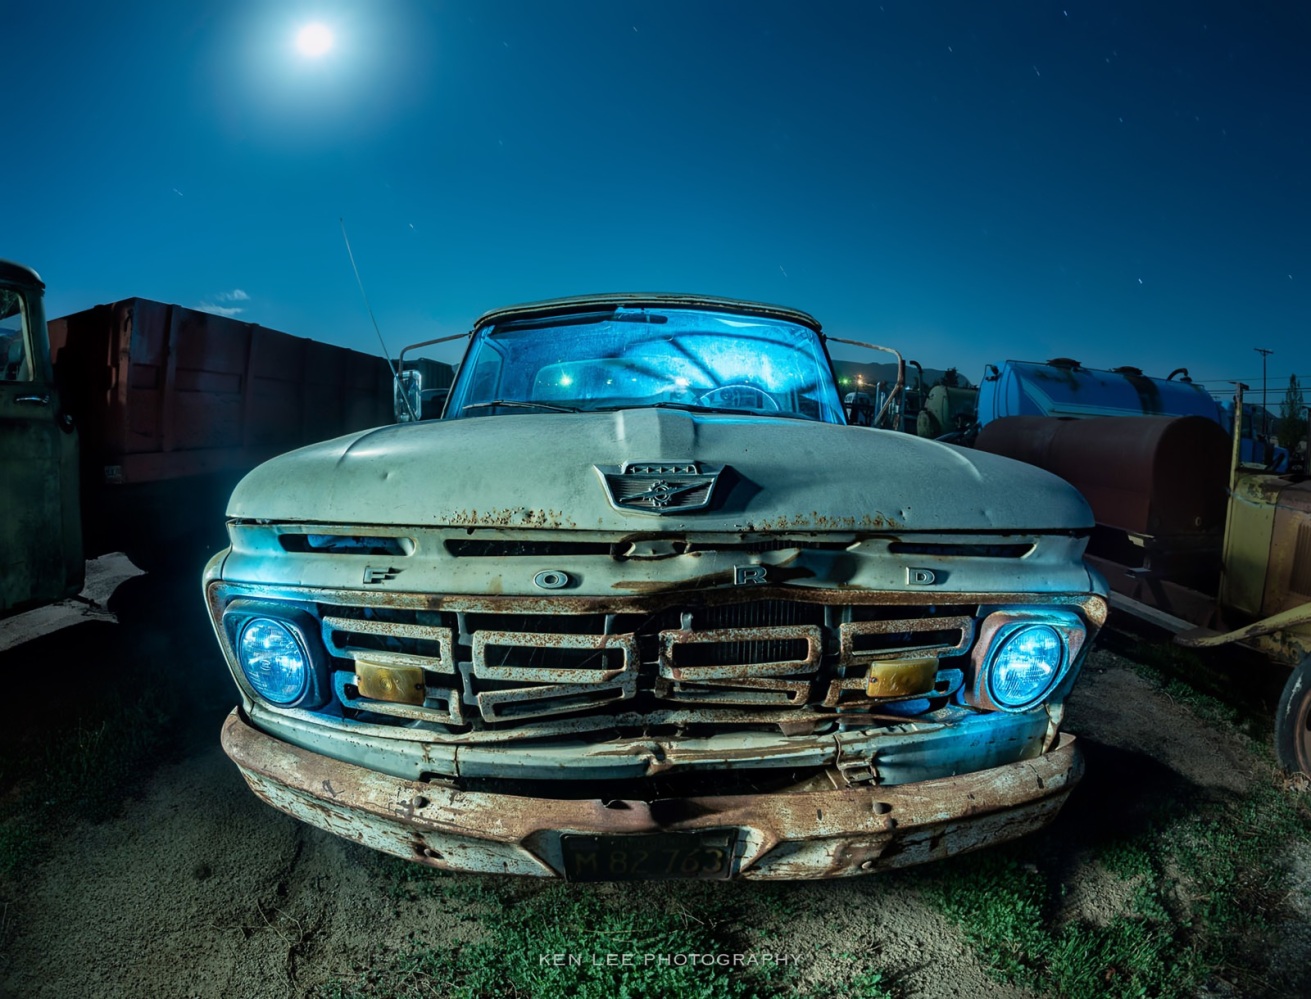 
I got close to the grille of the Ford truck when light painting. Notice how much the light falls off after that.